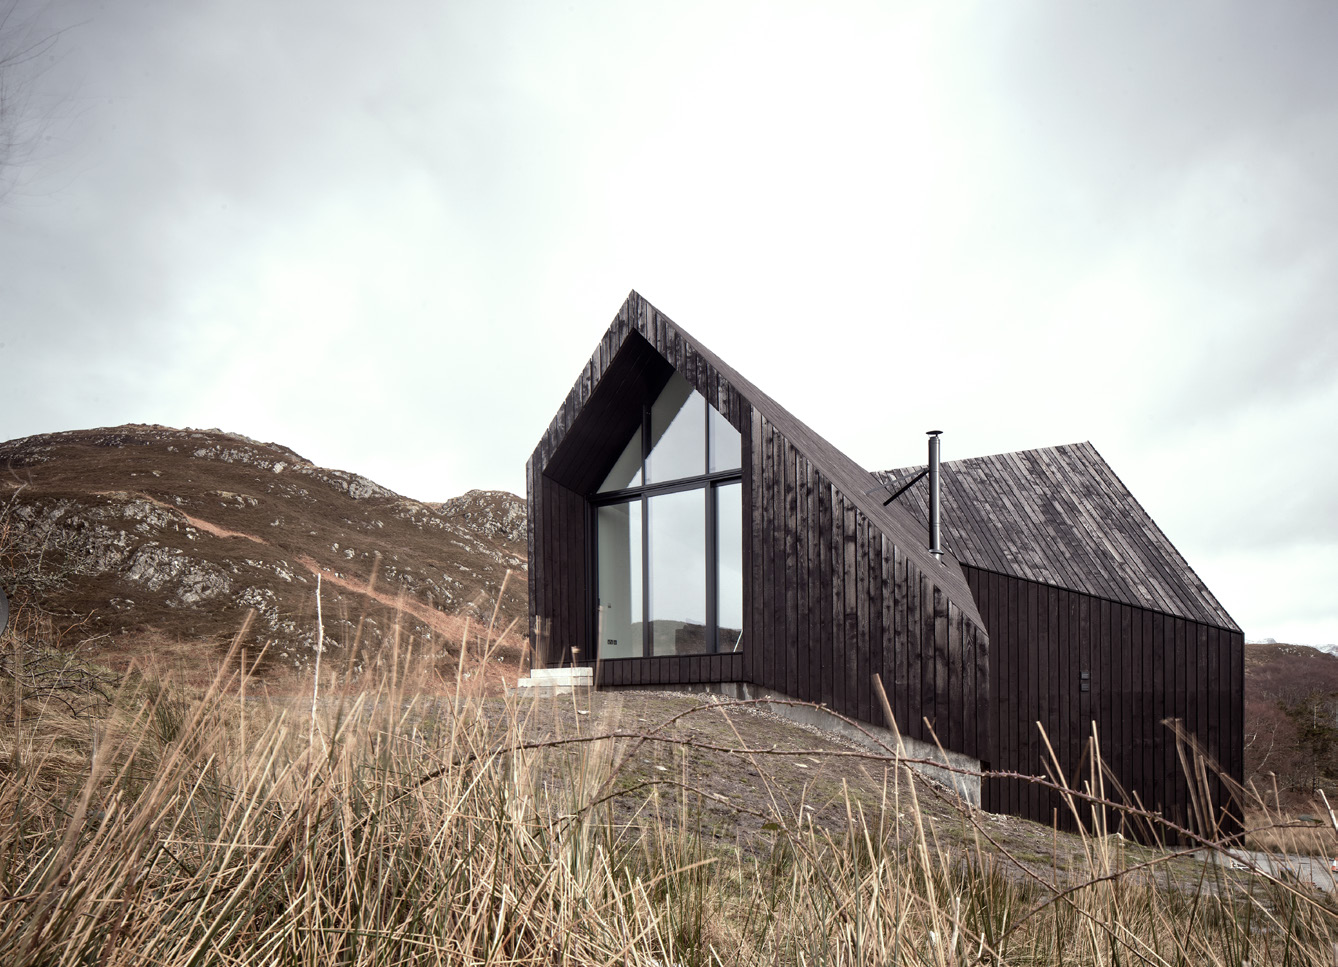 A house at Camusdarach Sands blending into a rural landscape. The house has dark brown timber cladding and with angular shaped roofs.